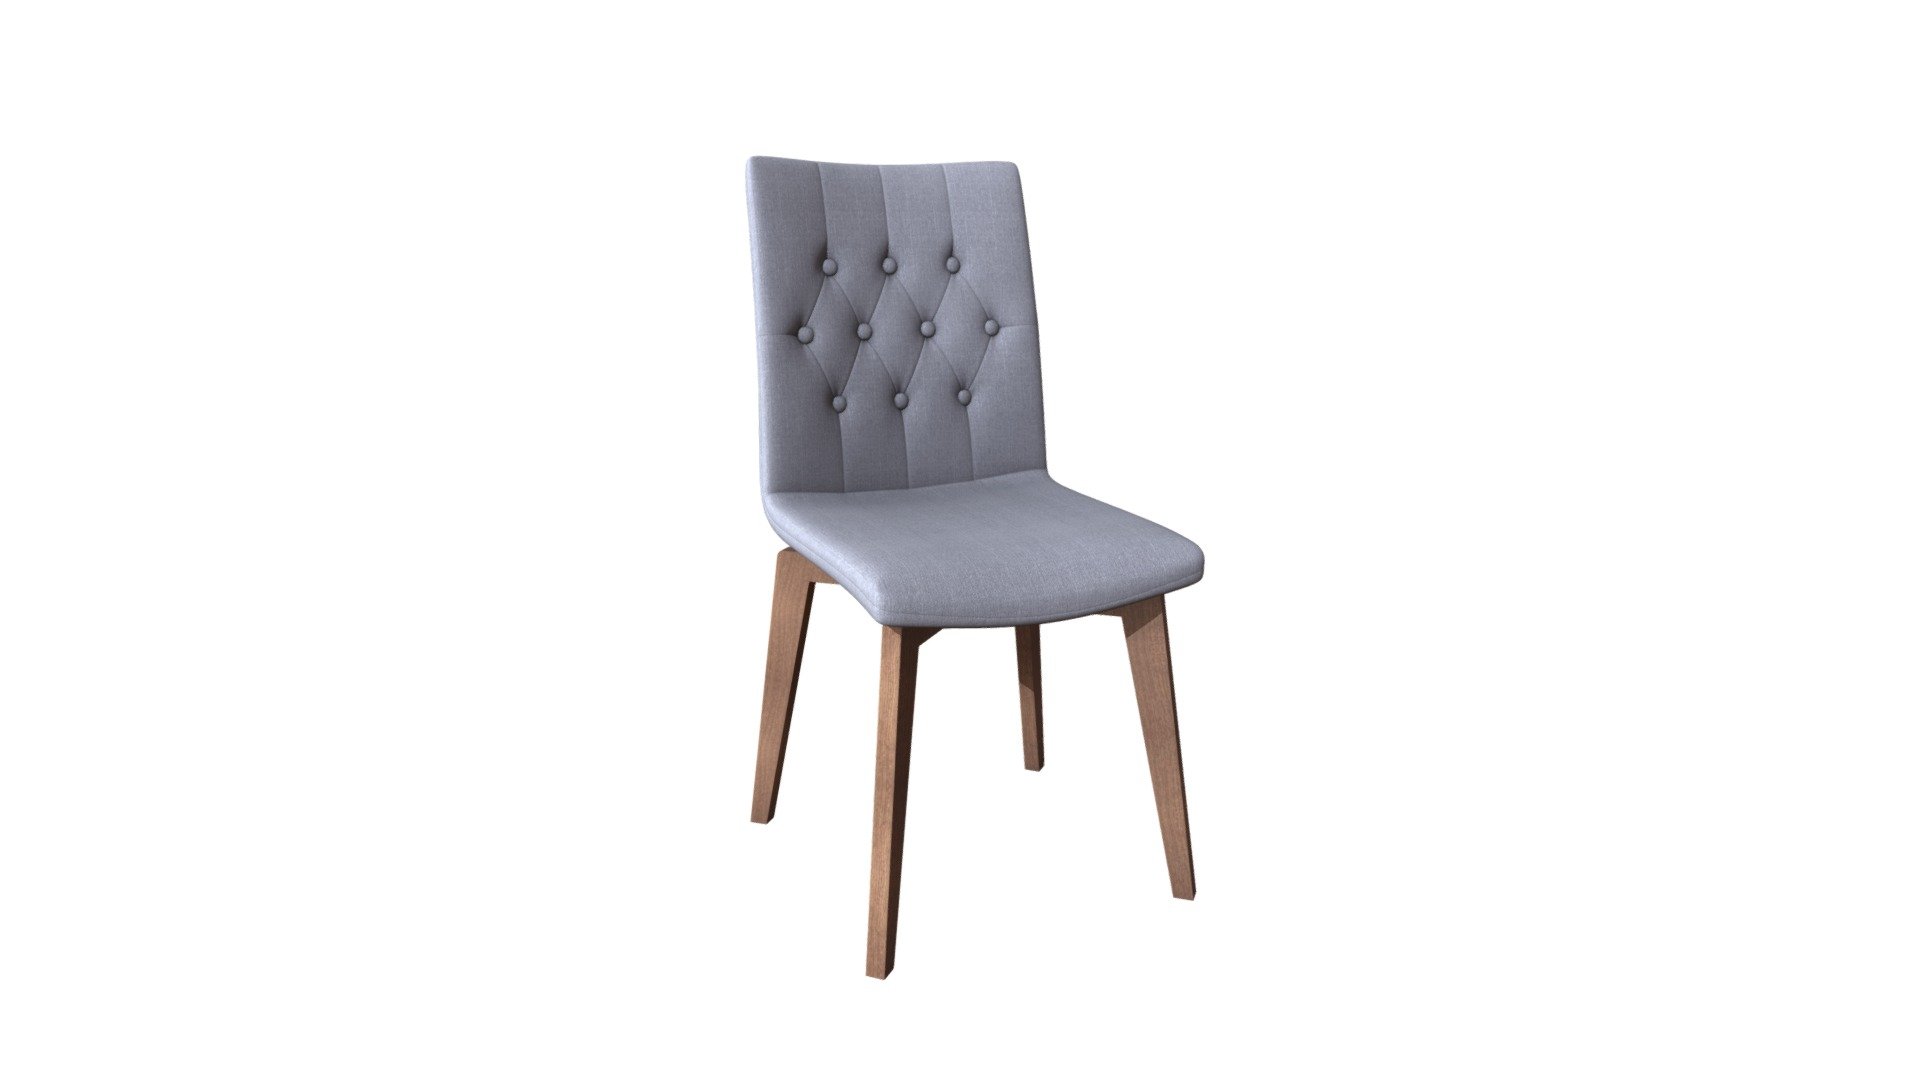 www.zuomod.com/orebro-dining-chair-graphite

Like the dress of a 1967 housewife, the Orebro Chair is a solid blend of fashion and function. Perfect around a square dining table or in the corner of a living room. Comes in tobacco, graphite, or pea fabric 3d model